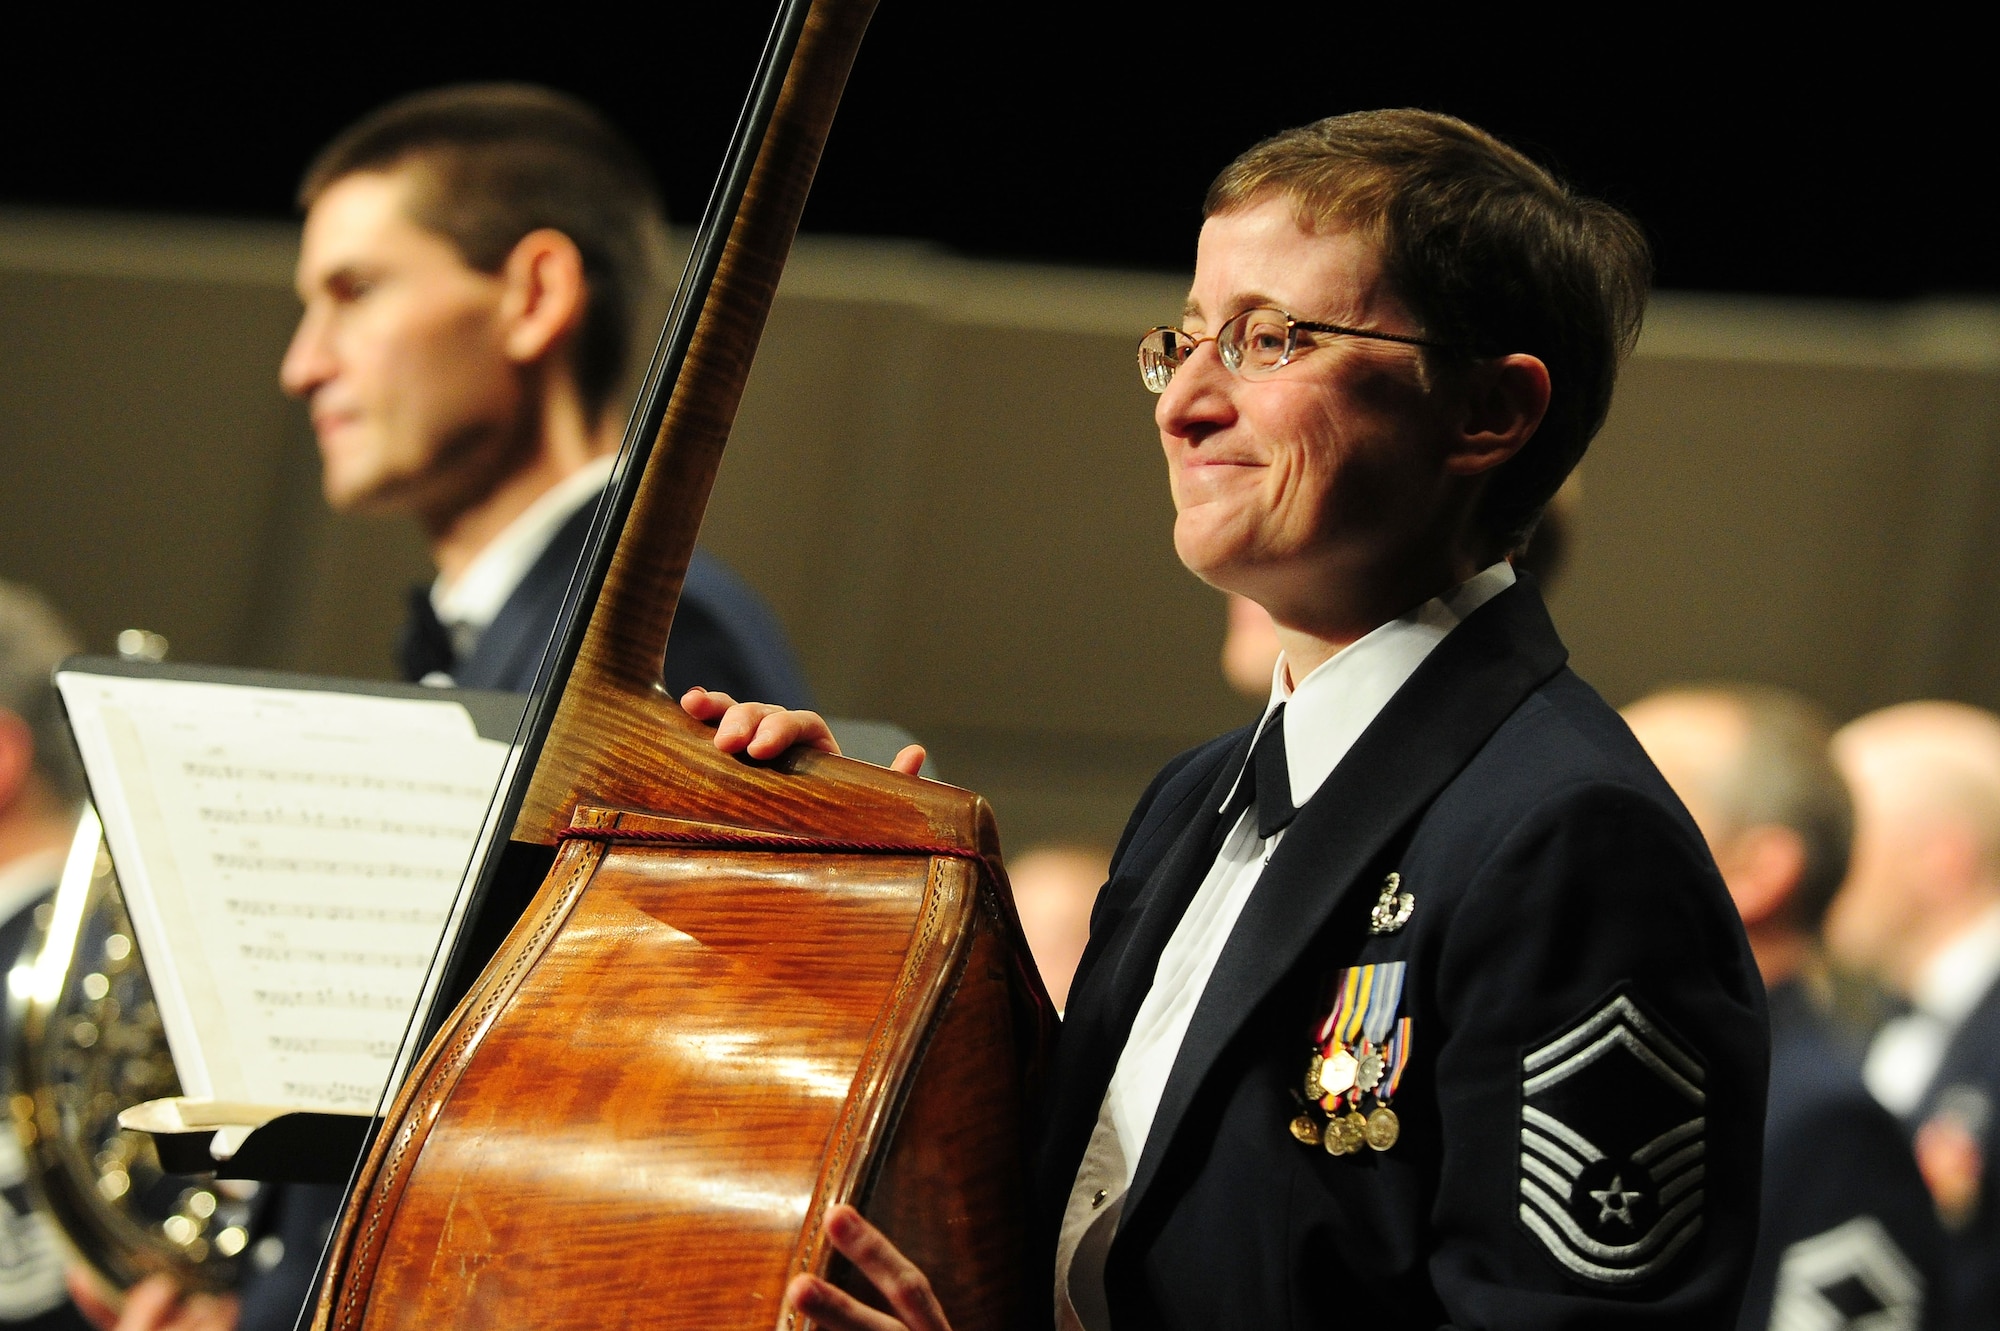 Senior Master Sgt. Chris Kosky, U.S. Air Force Band bassist, is humbled by the crowd's reaction following a perfomance at the 66th Annual Midwest Clinic, Dec. 19, in Chicago, Ill. "What a great way to end the night," said High School Band Director Christopher Poncin, who attended two of the band's three performances. "Thank you so much for everything you guys are doing; keep up the good work." (U.S. Air Force photo by Senior Airman Steele C. G. Britton)